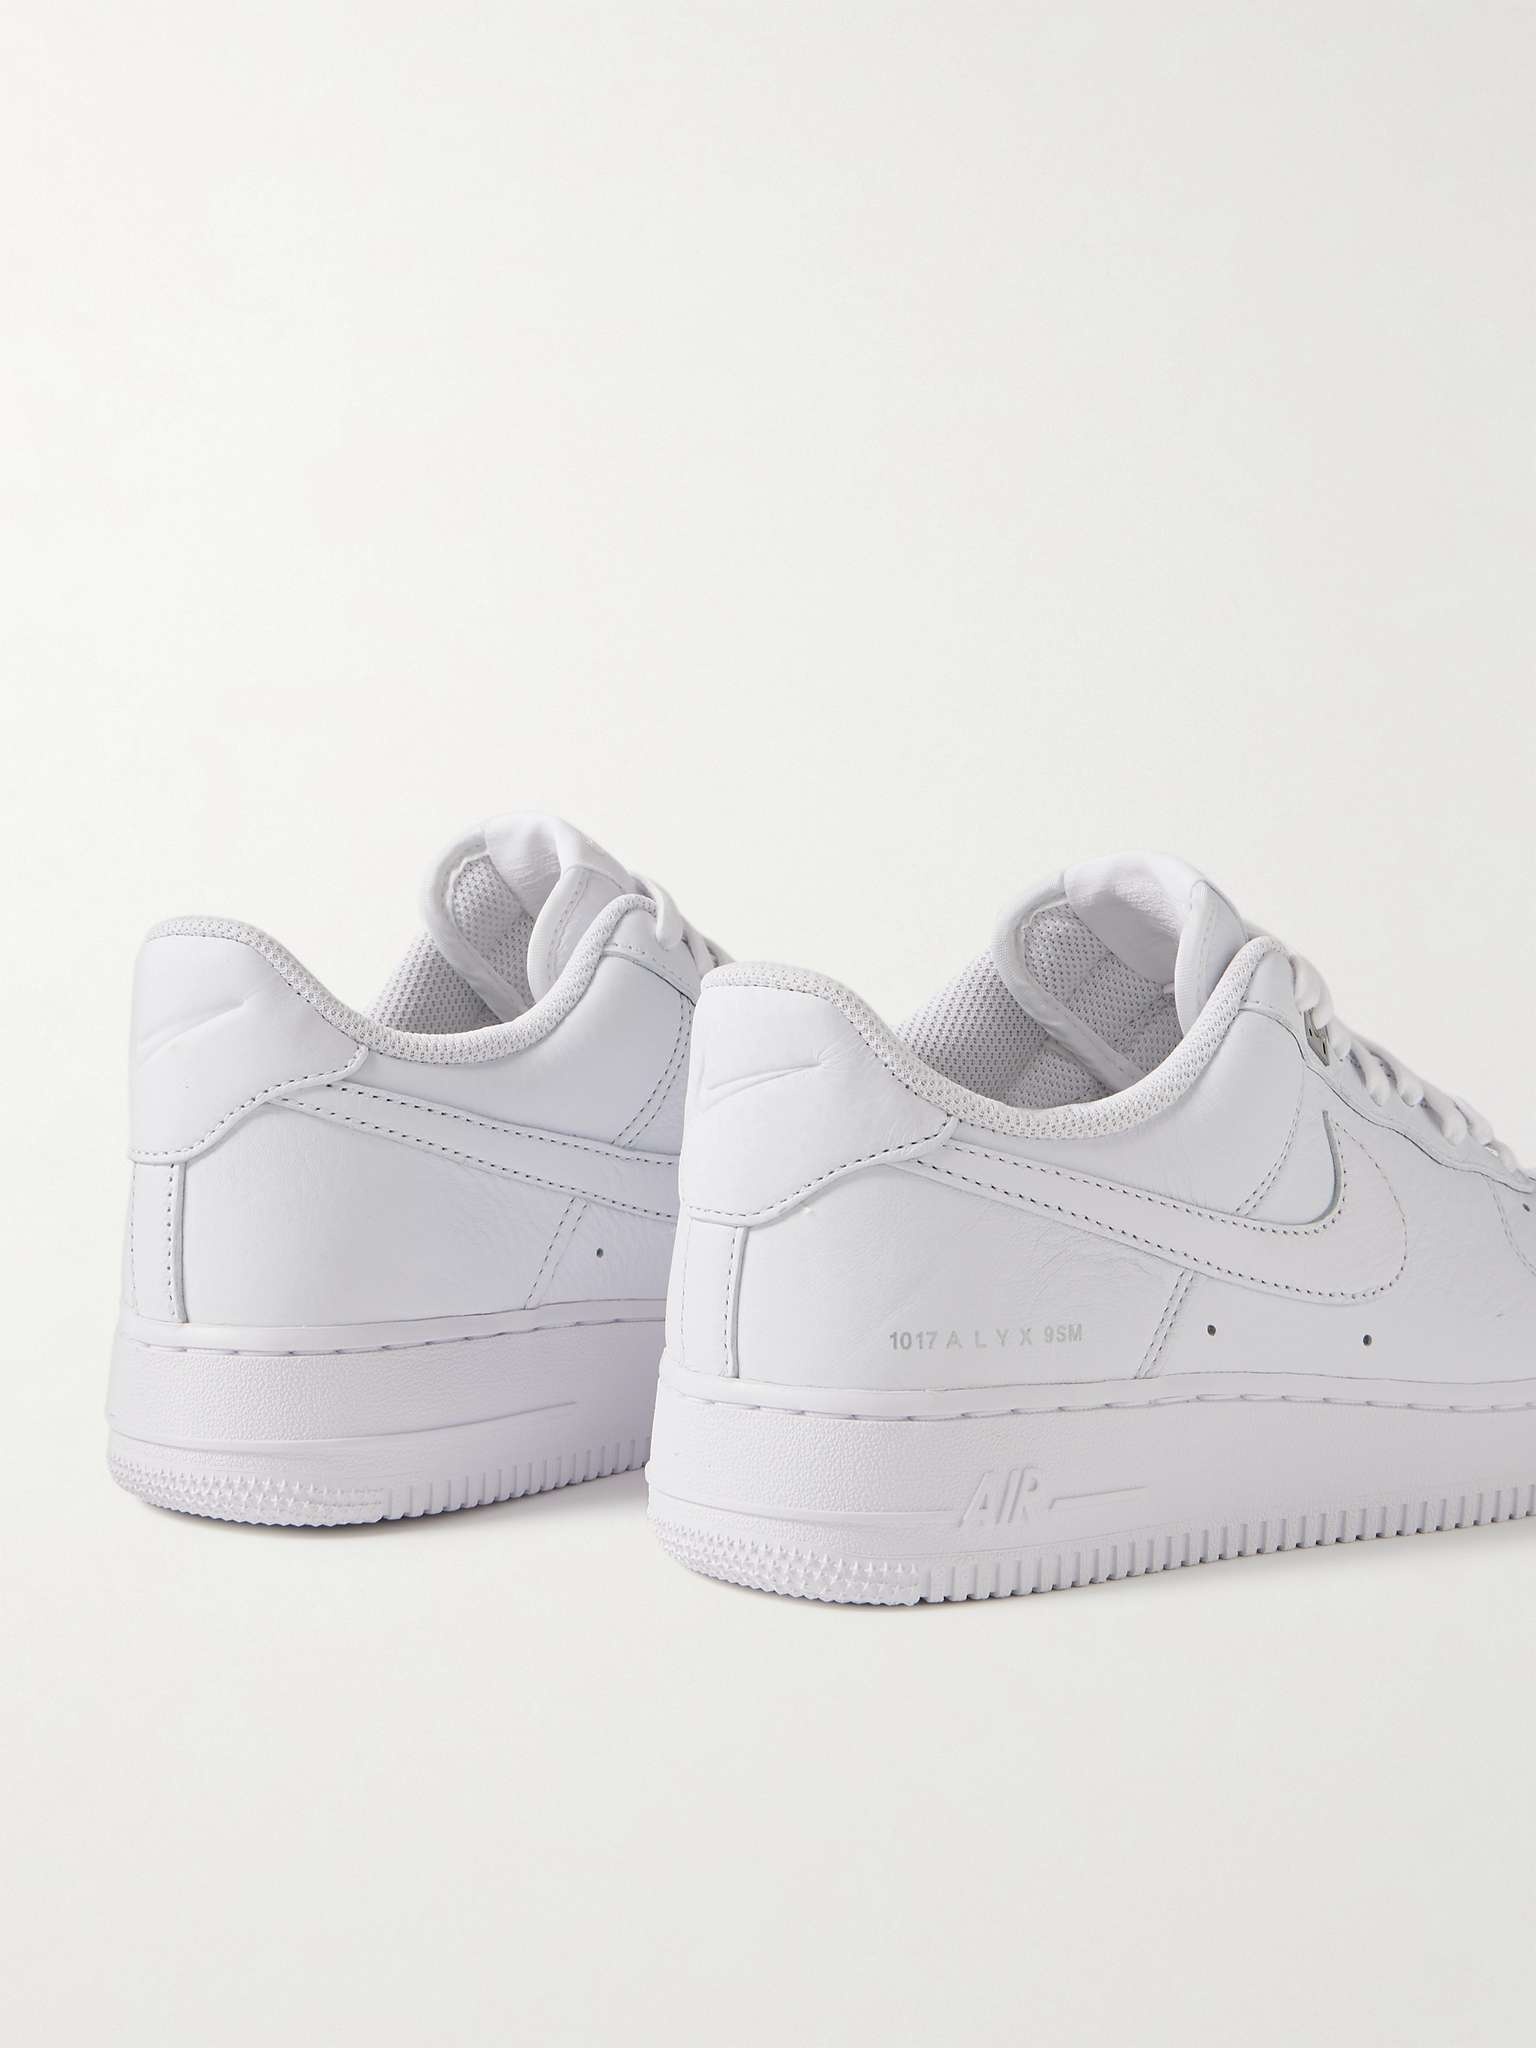 + 1017 ALYX 9SM Air Force 1 SP Leather Sneakers - 5